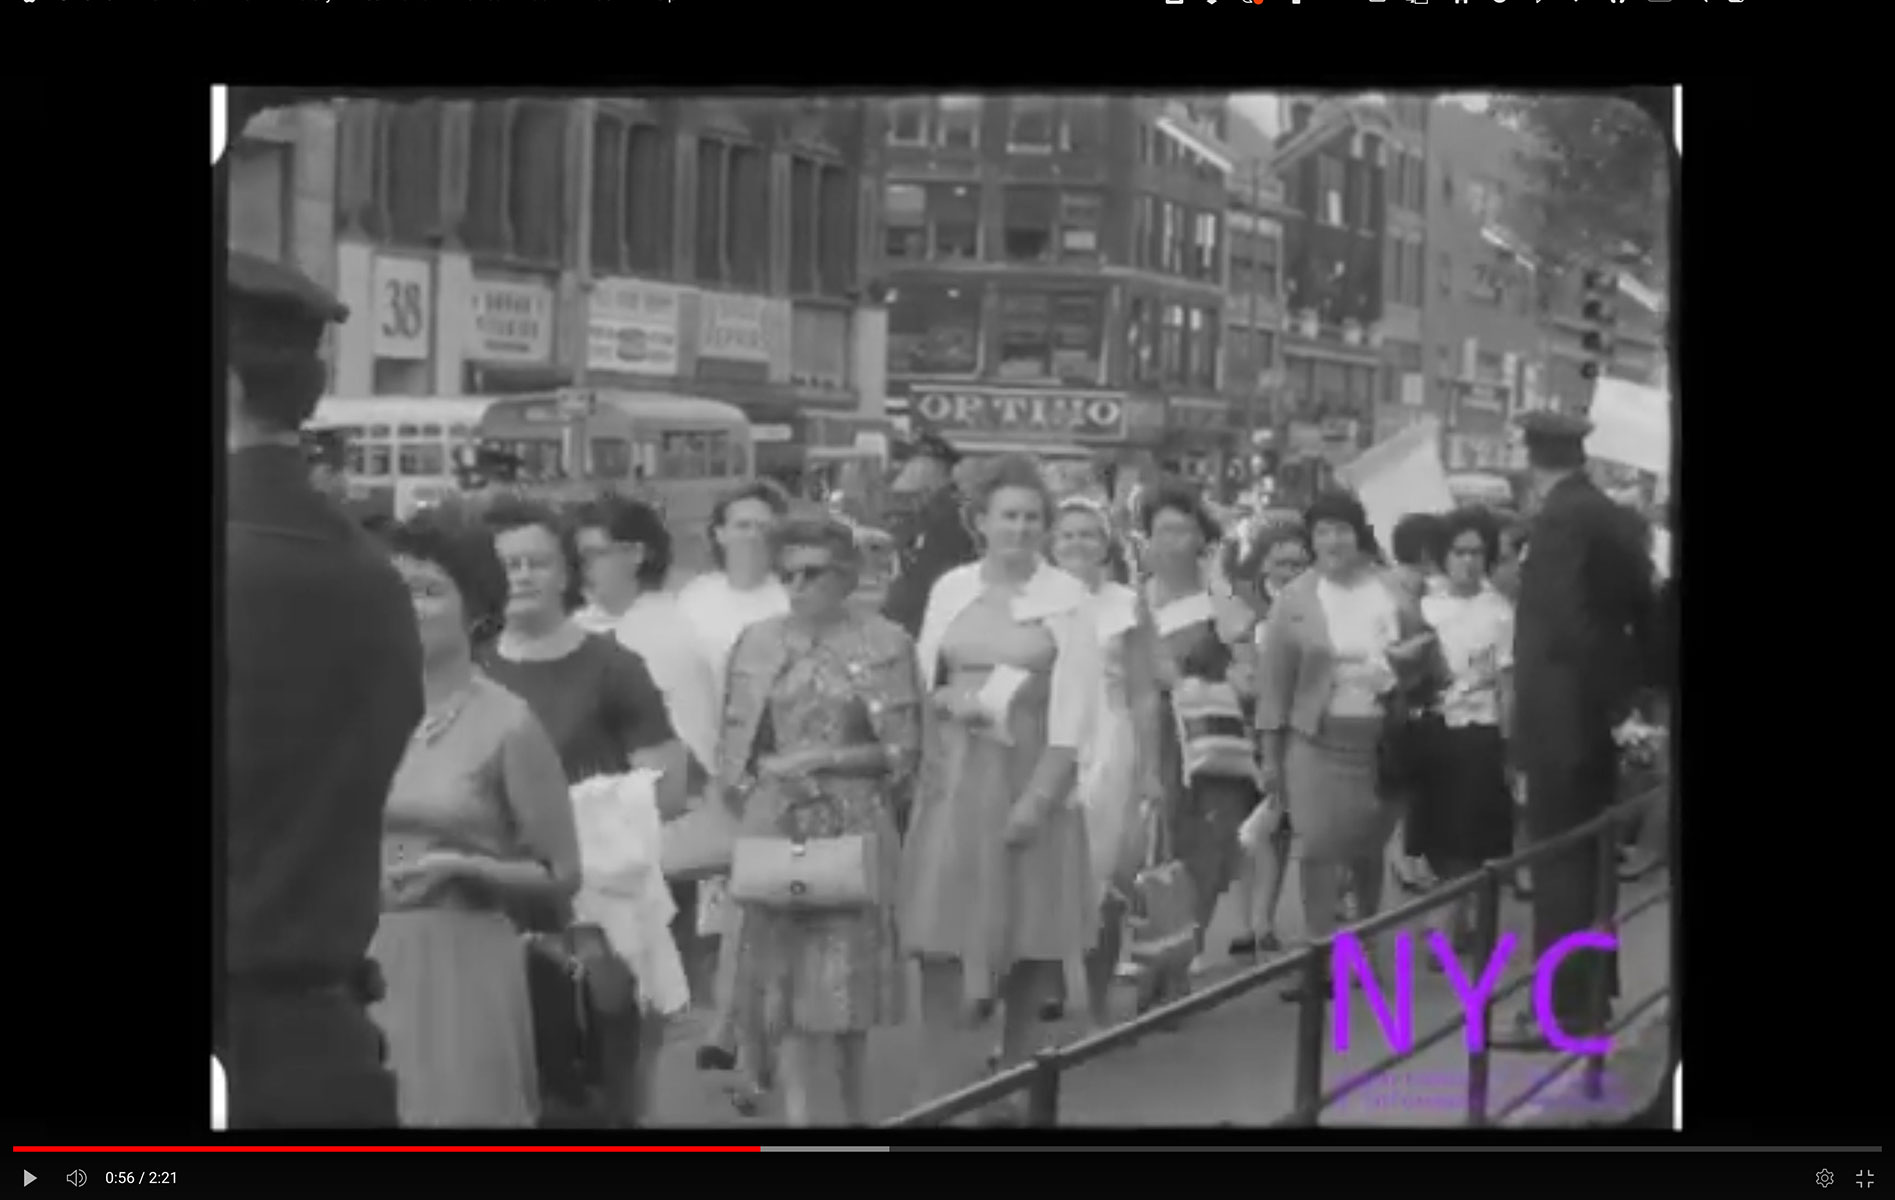 White women carry signs protesting desegregation